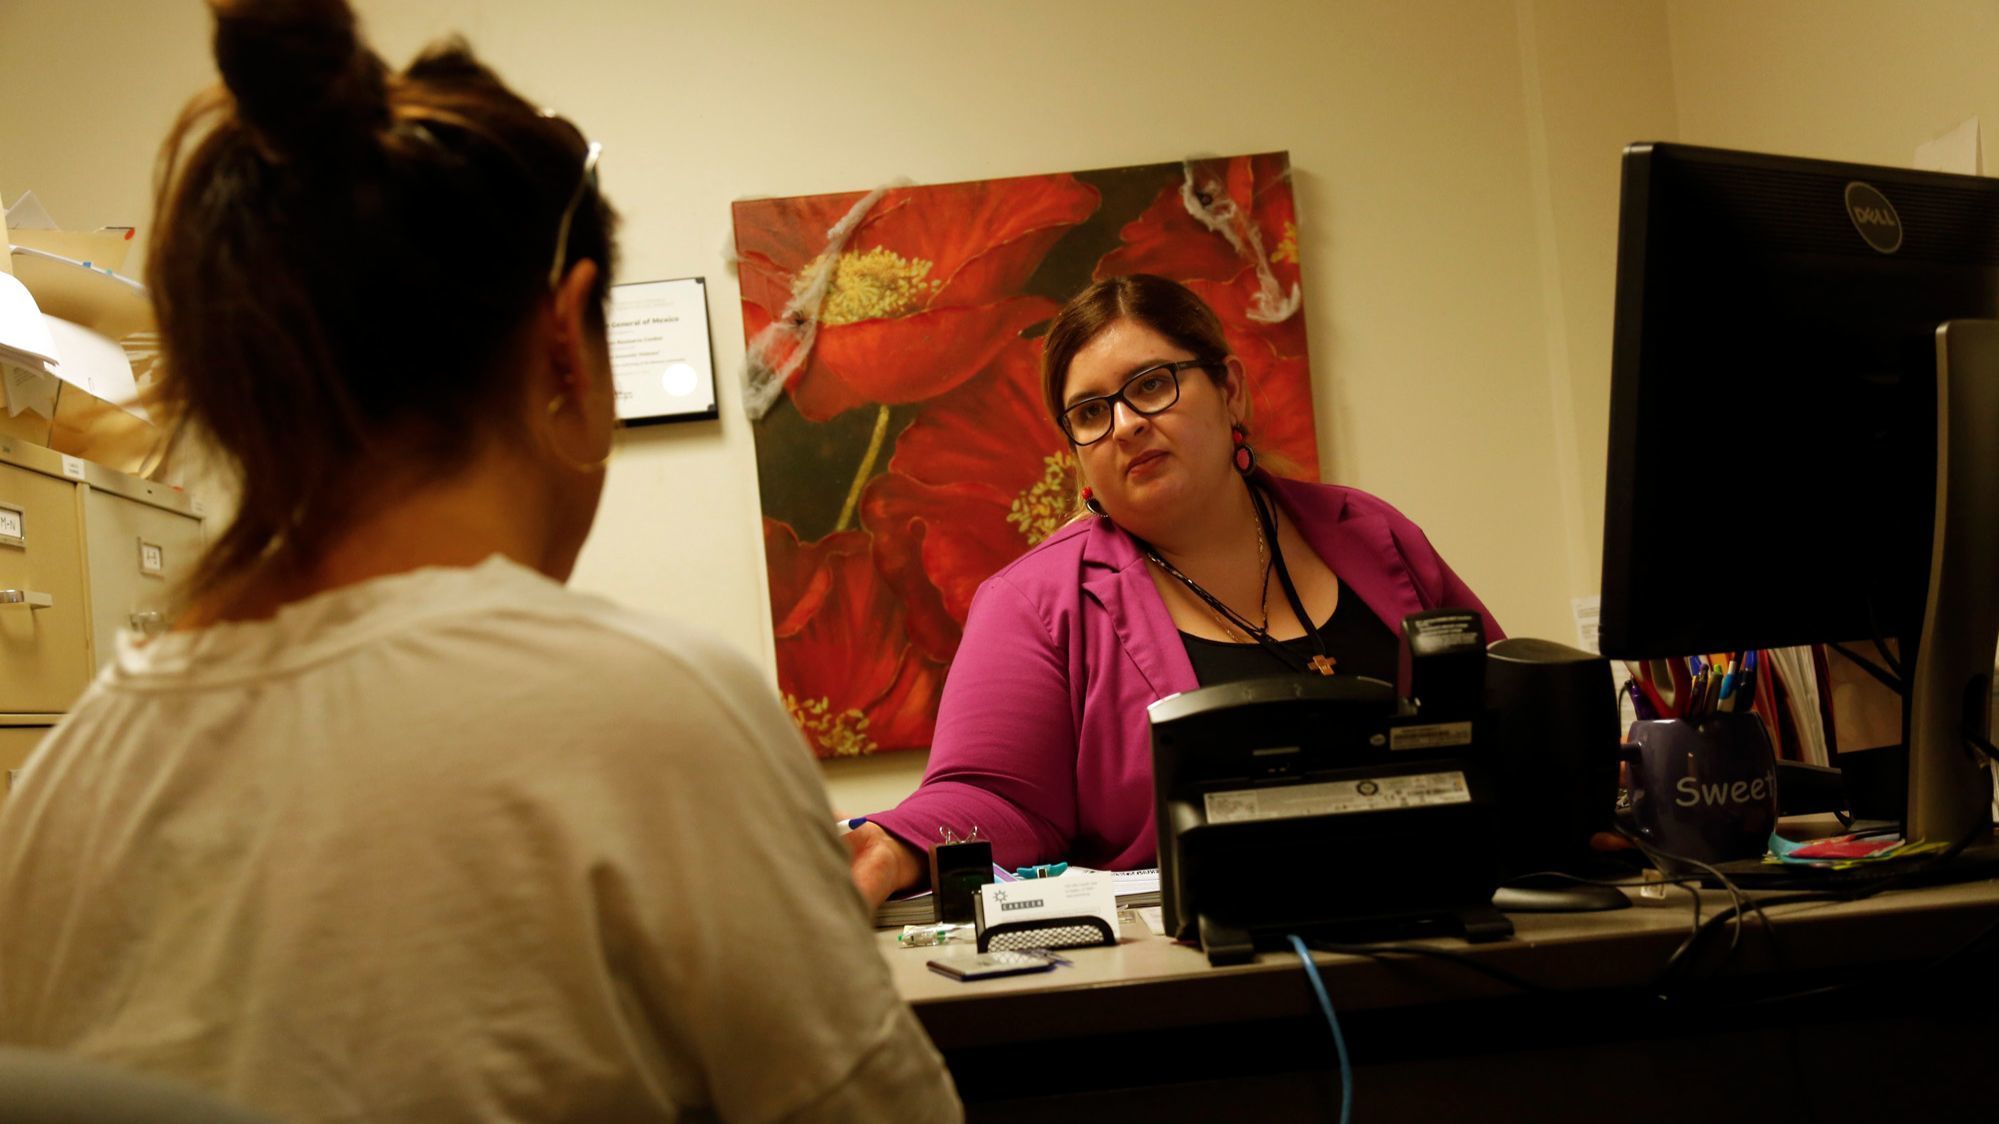 Maria meets with legal assistant Albanydia Amezquita, right, at the Central American Resource Center, which helped her obtain immigration relief through the U-visa program.